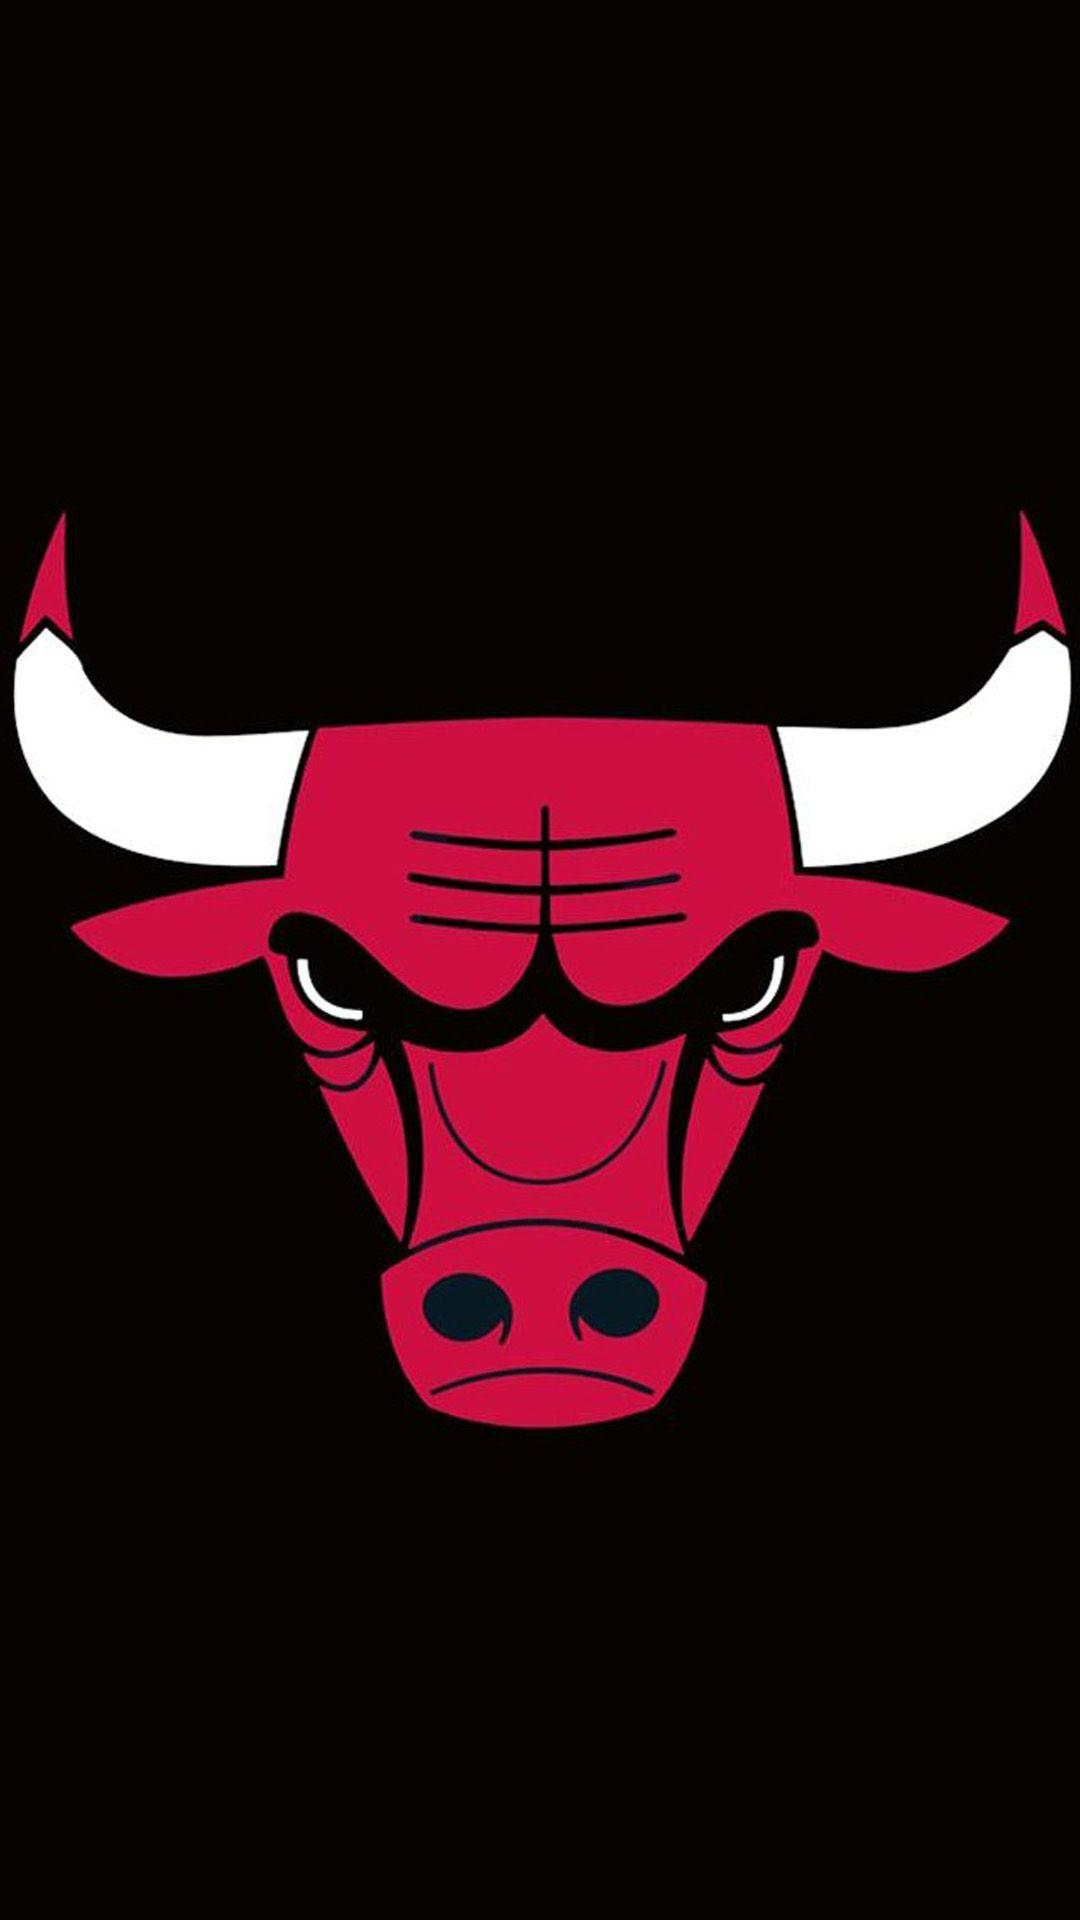 Wallpaper.wiki Free HD Chicago Bulls IPhone Photos PIC WPC006814